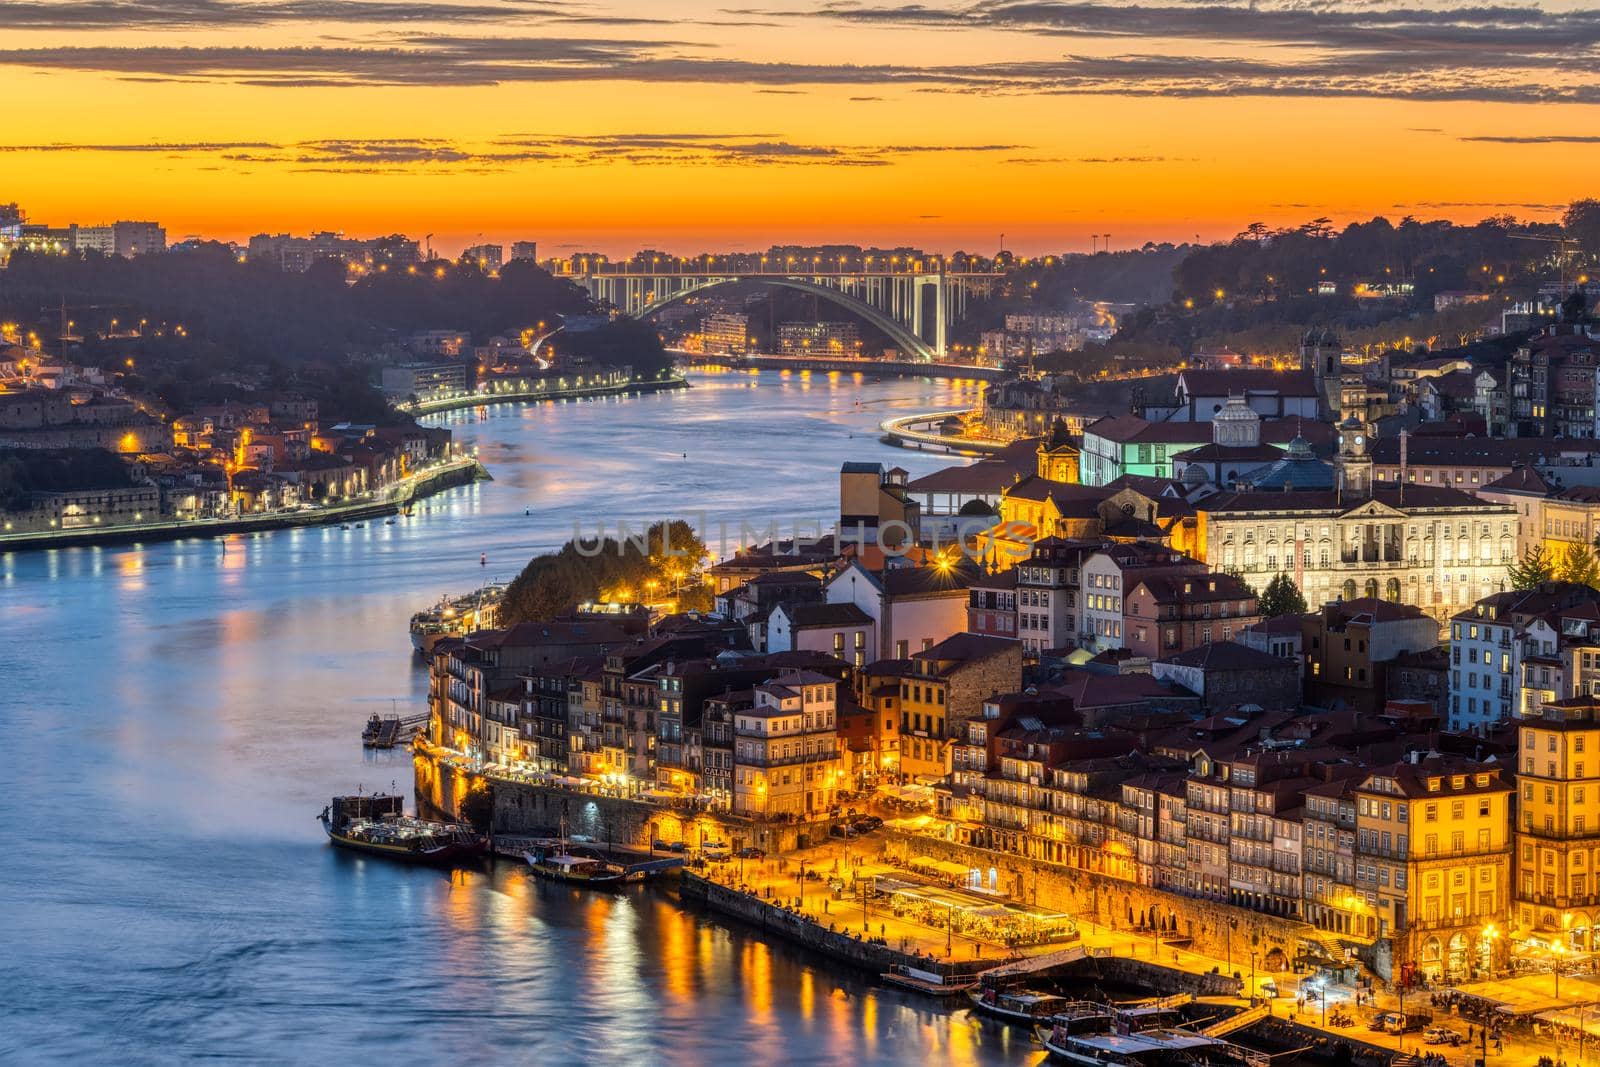 The old town of Porto after sunset by elxeneize